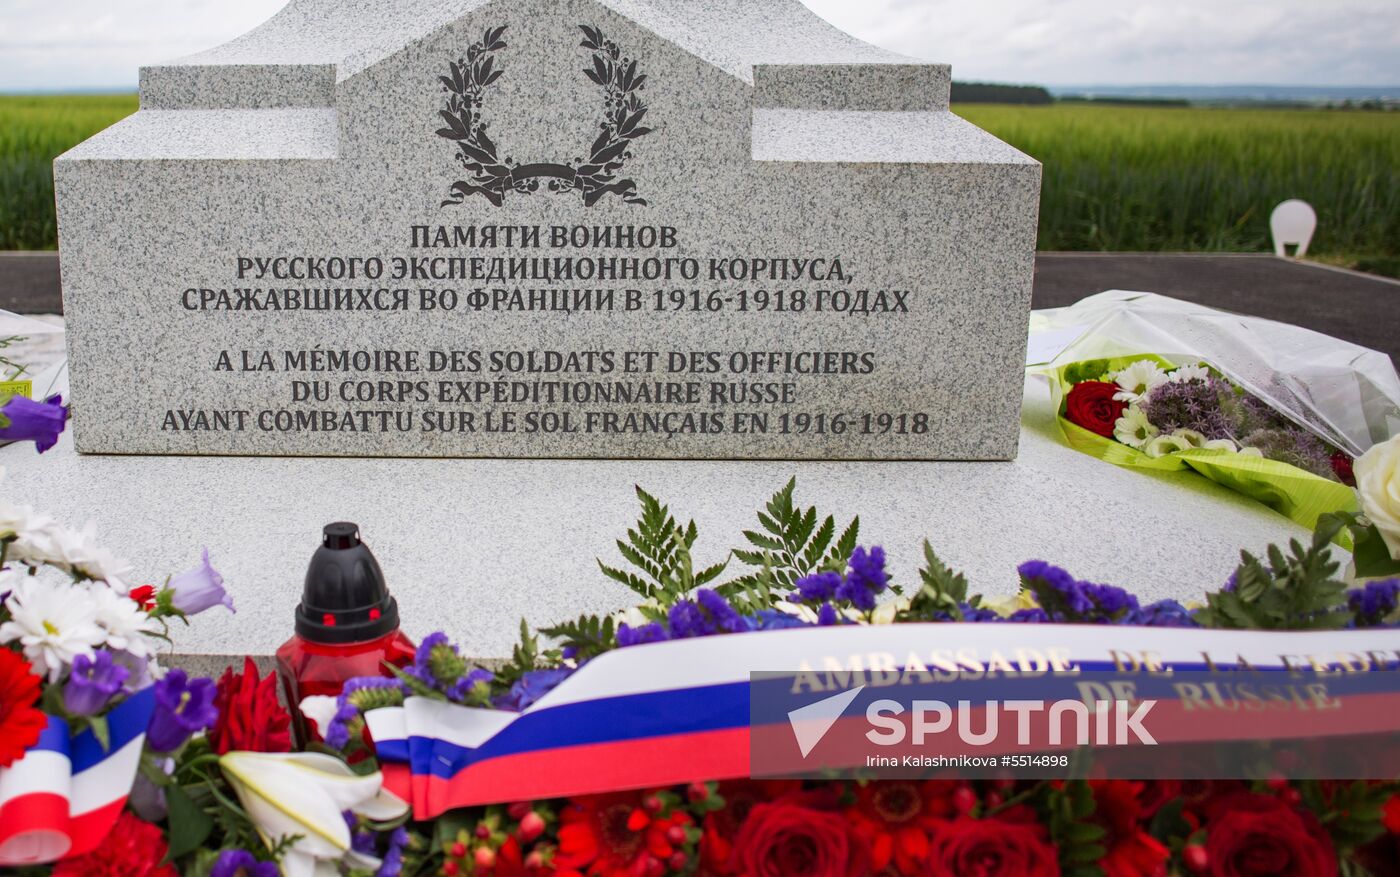 Unveiling of obelisk to soldiers of Russian Expeditionary Force in France